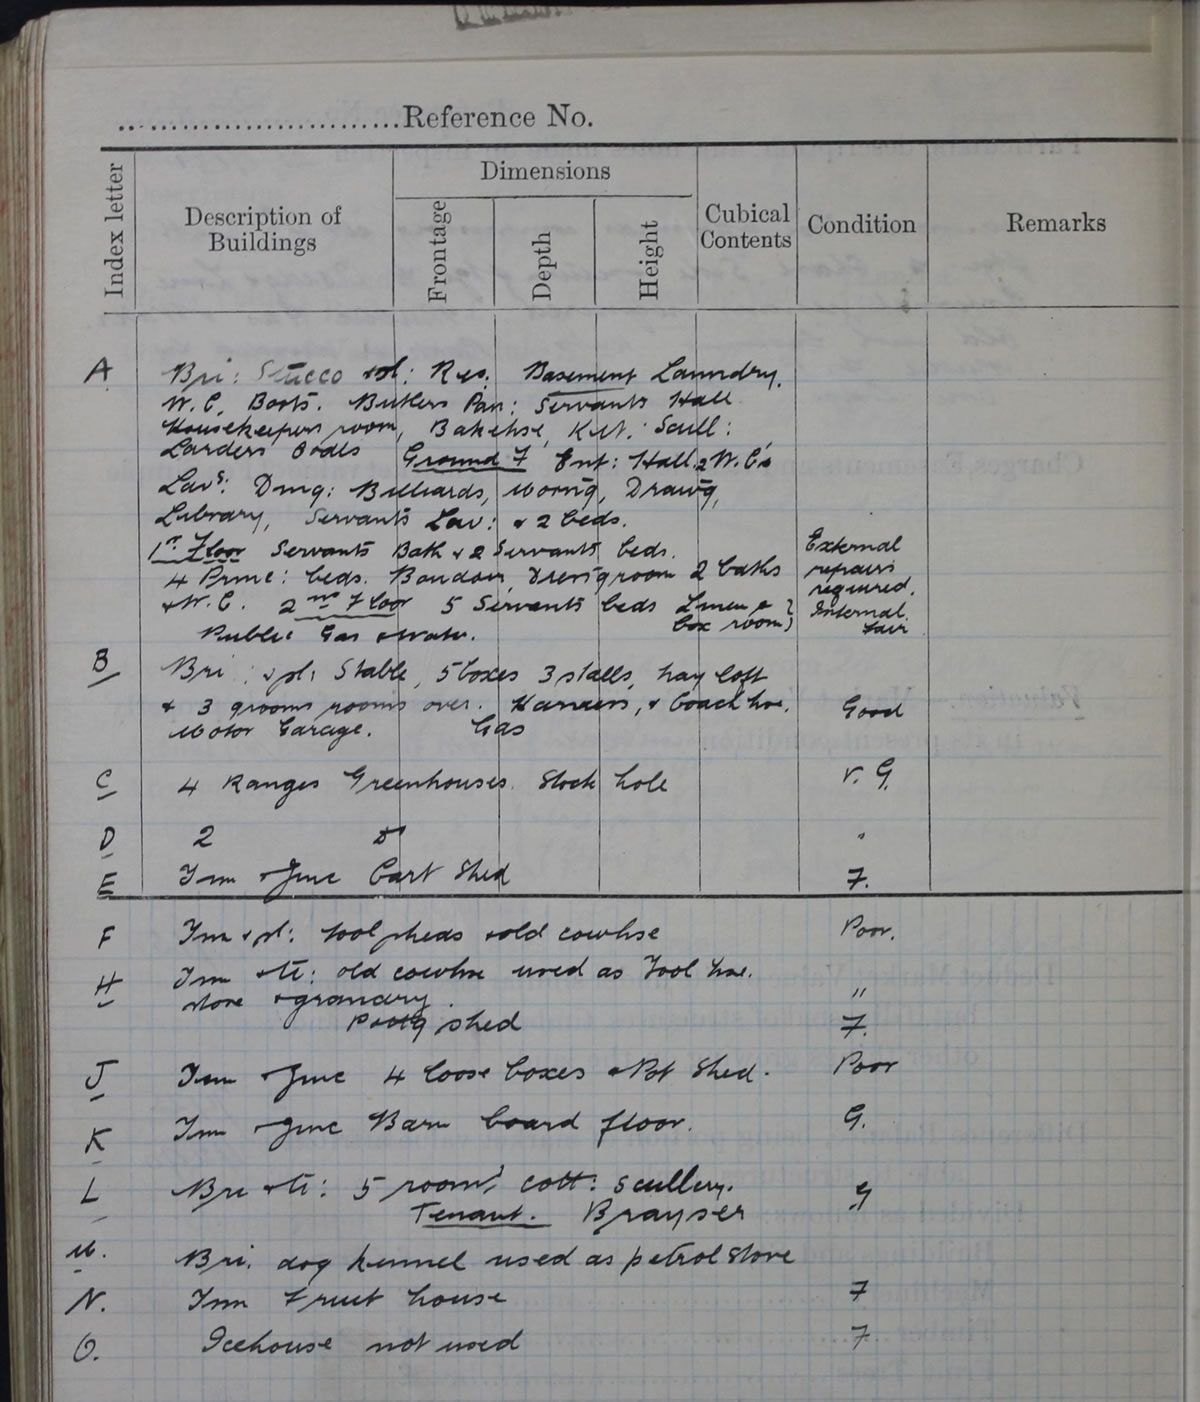 Field book revealing details of the property and its conditions